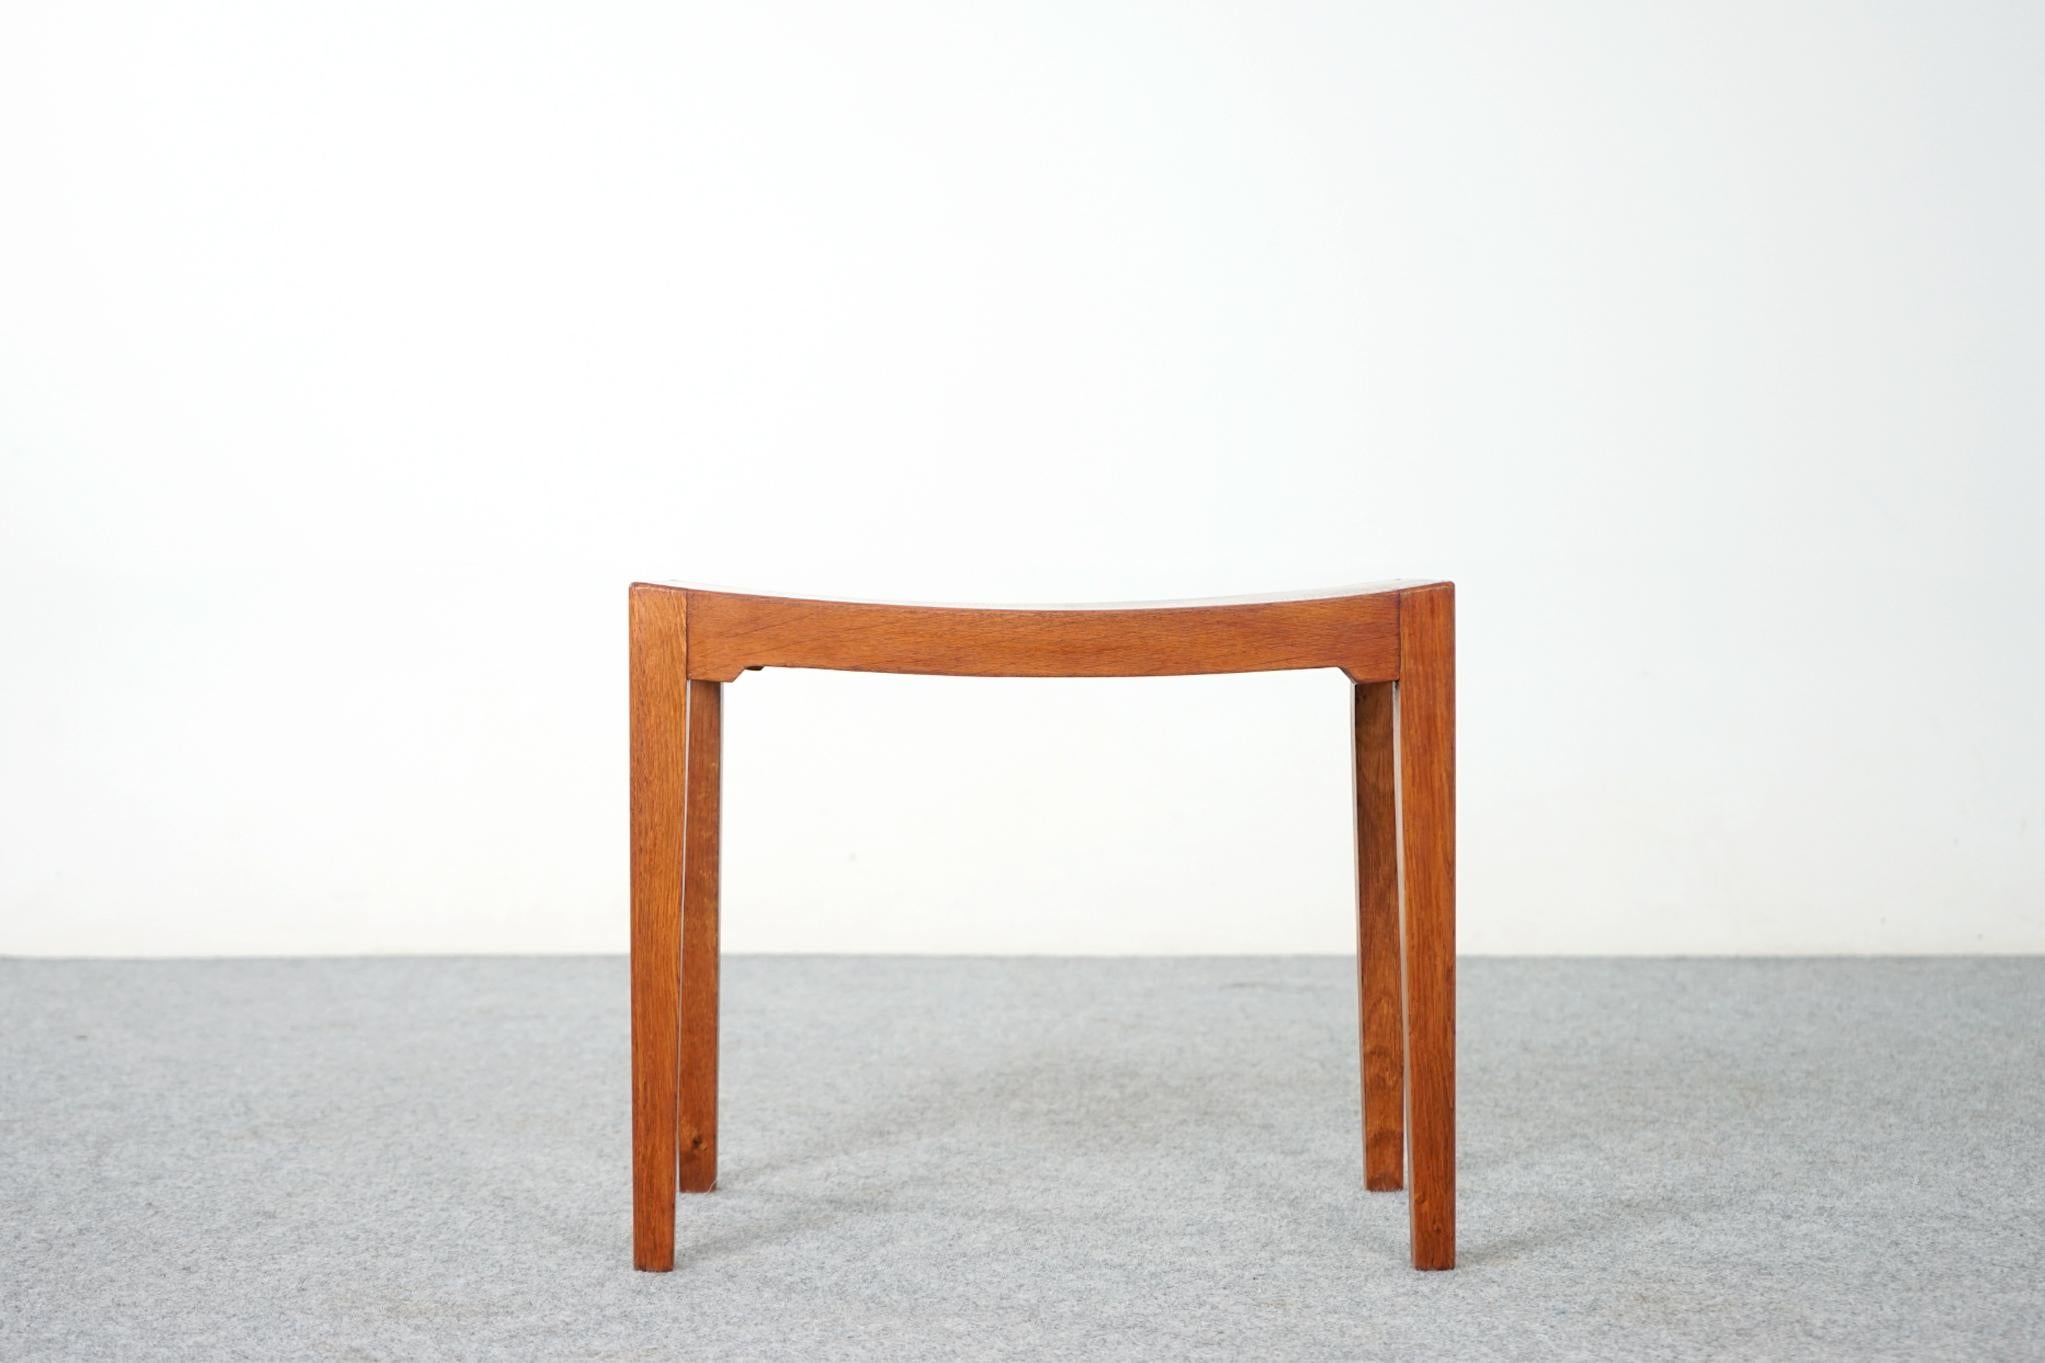 Oak Danish arched stool / side table, circa 1960's. Compact design can be used with virtually any seating type, easy to move around the home. Nice minimal footprint, pop it by your front door, ideal shoe tying bench or sweet side table. Versatile,